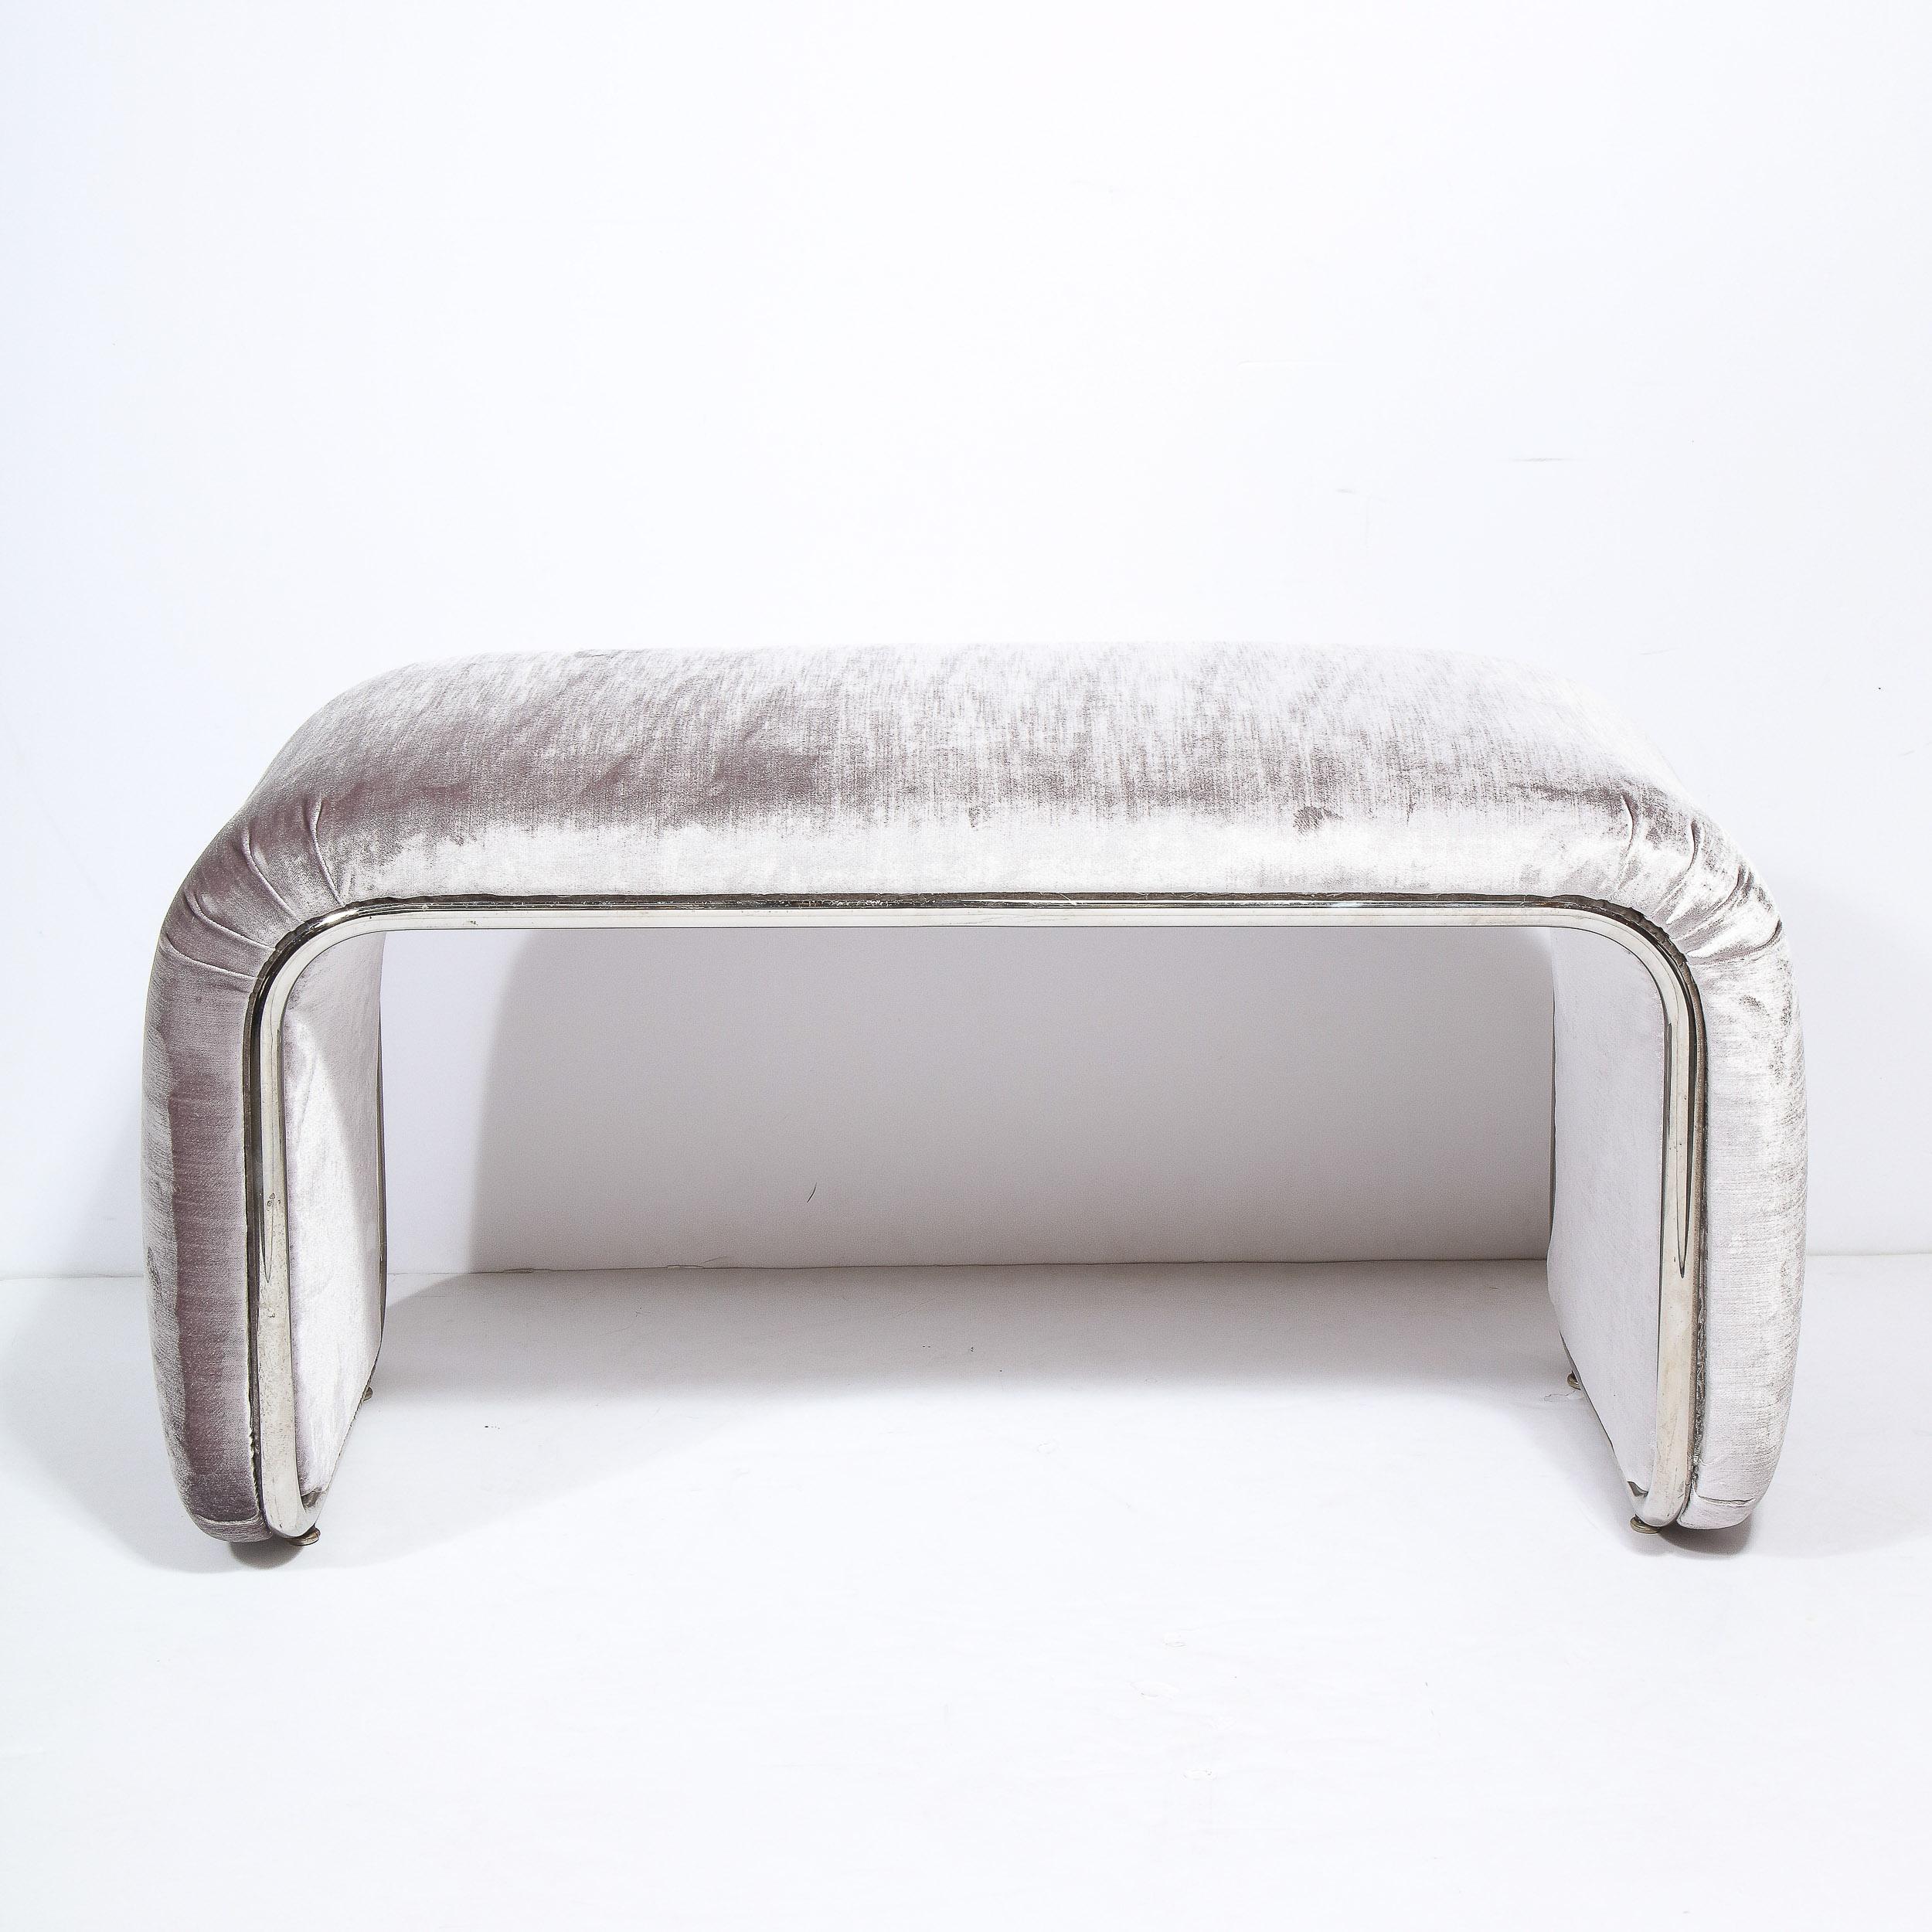 This glamorous Mid Century Modern waterfall bench was realized in the United States circa 1970. It features a dramatic streamlined form newly reupholstered in a beautiful smoked velvet. The perimeter of the piece is wrapped in tubular chrome with